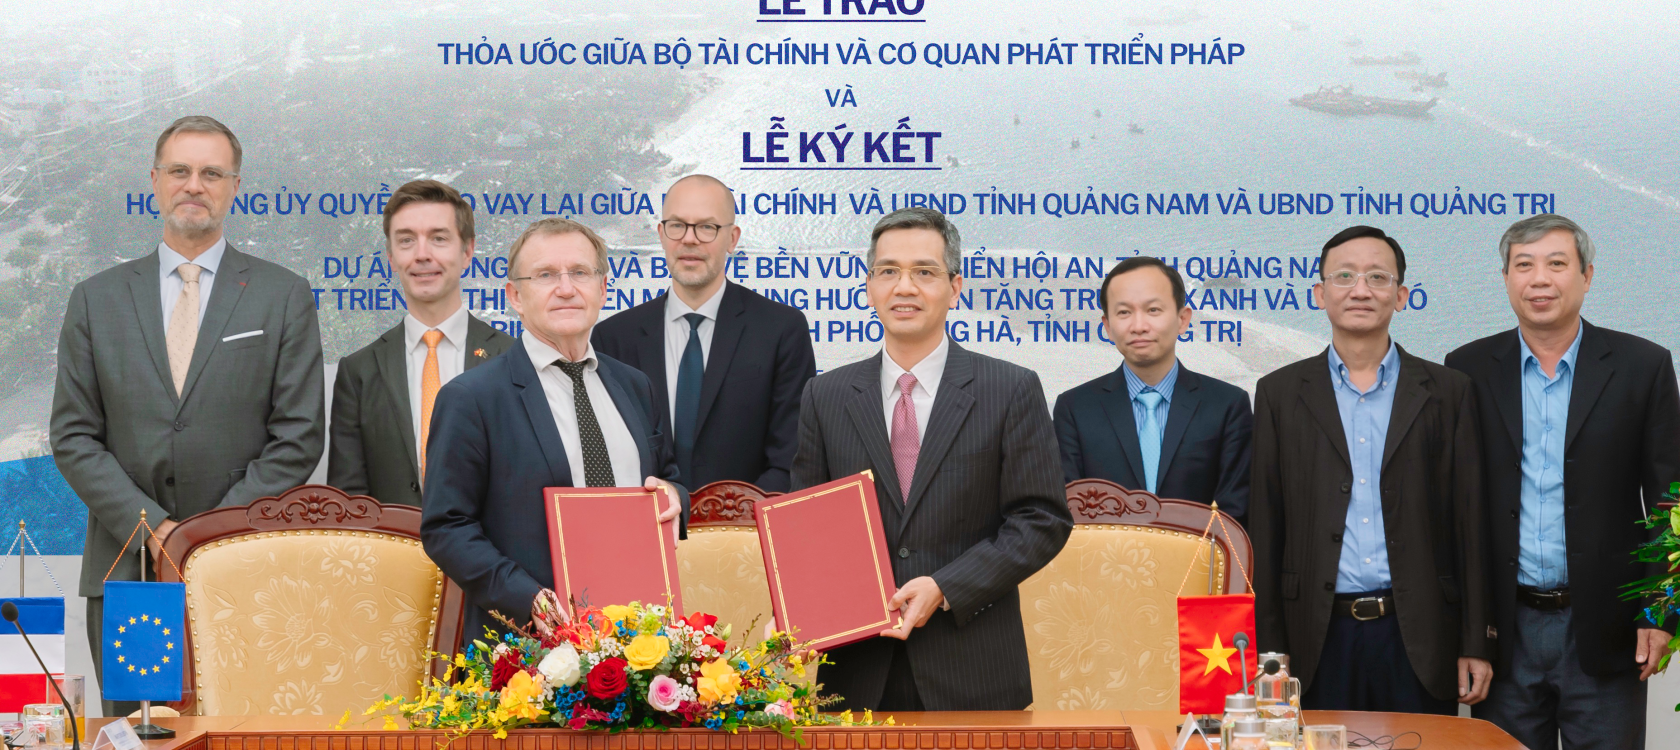 EU and France provide $78.5 million for Quang Nam and Quang Tri to tackle climate change